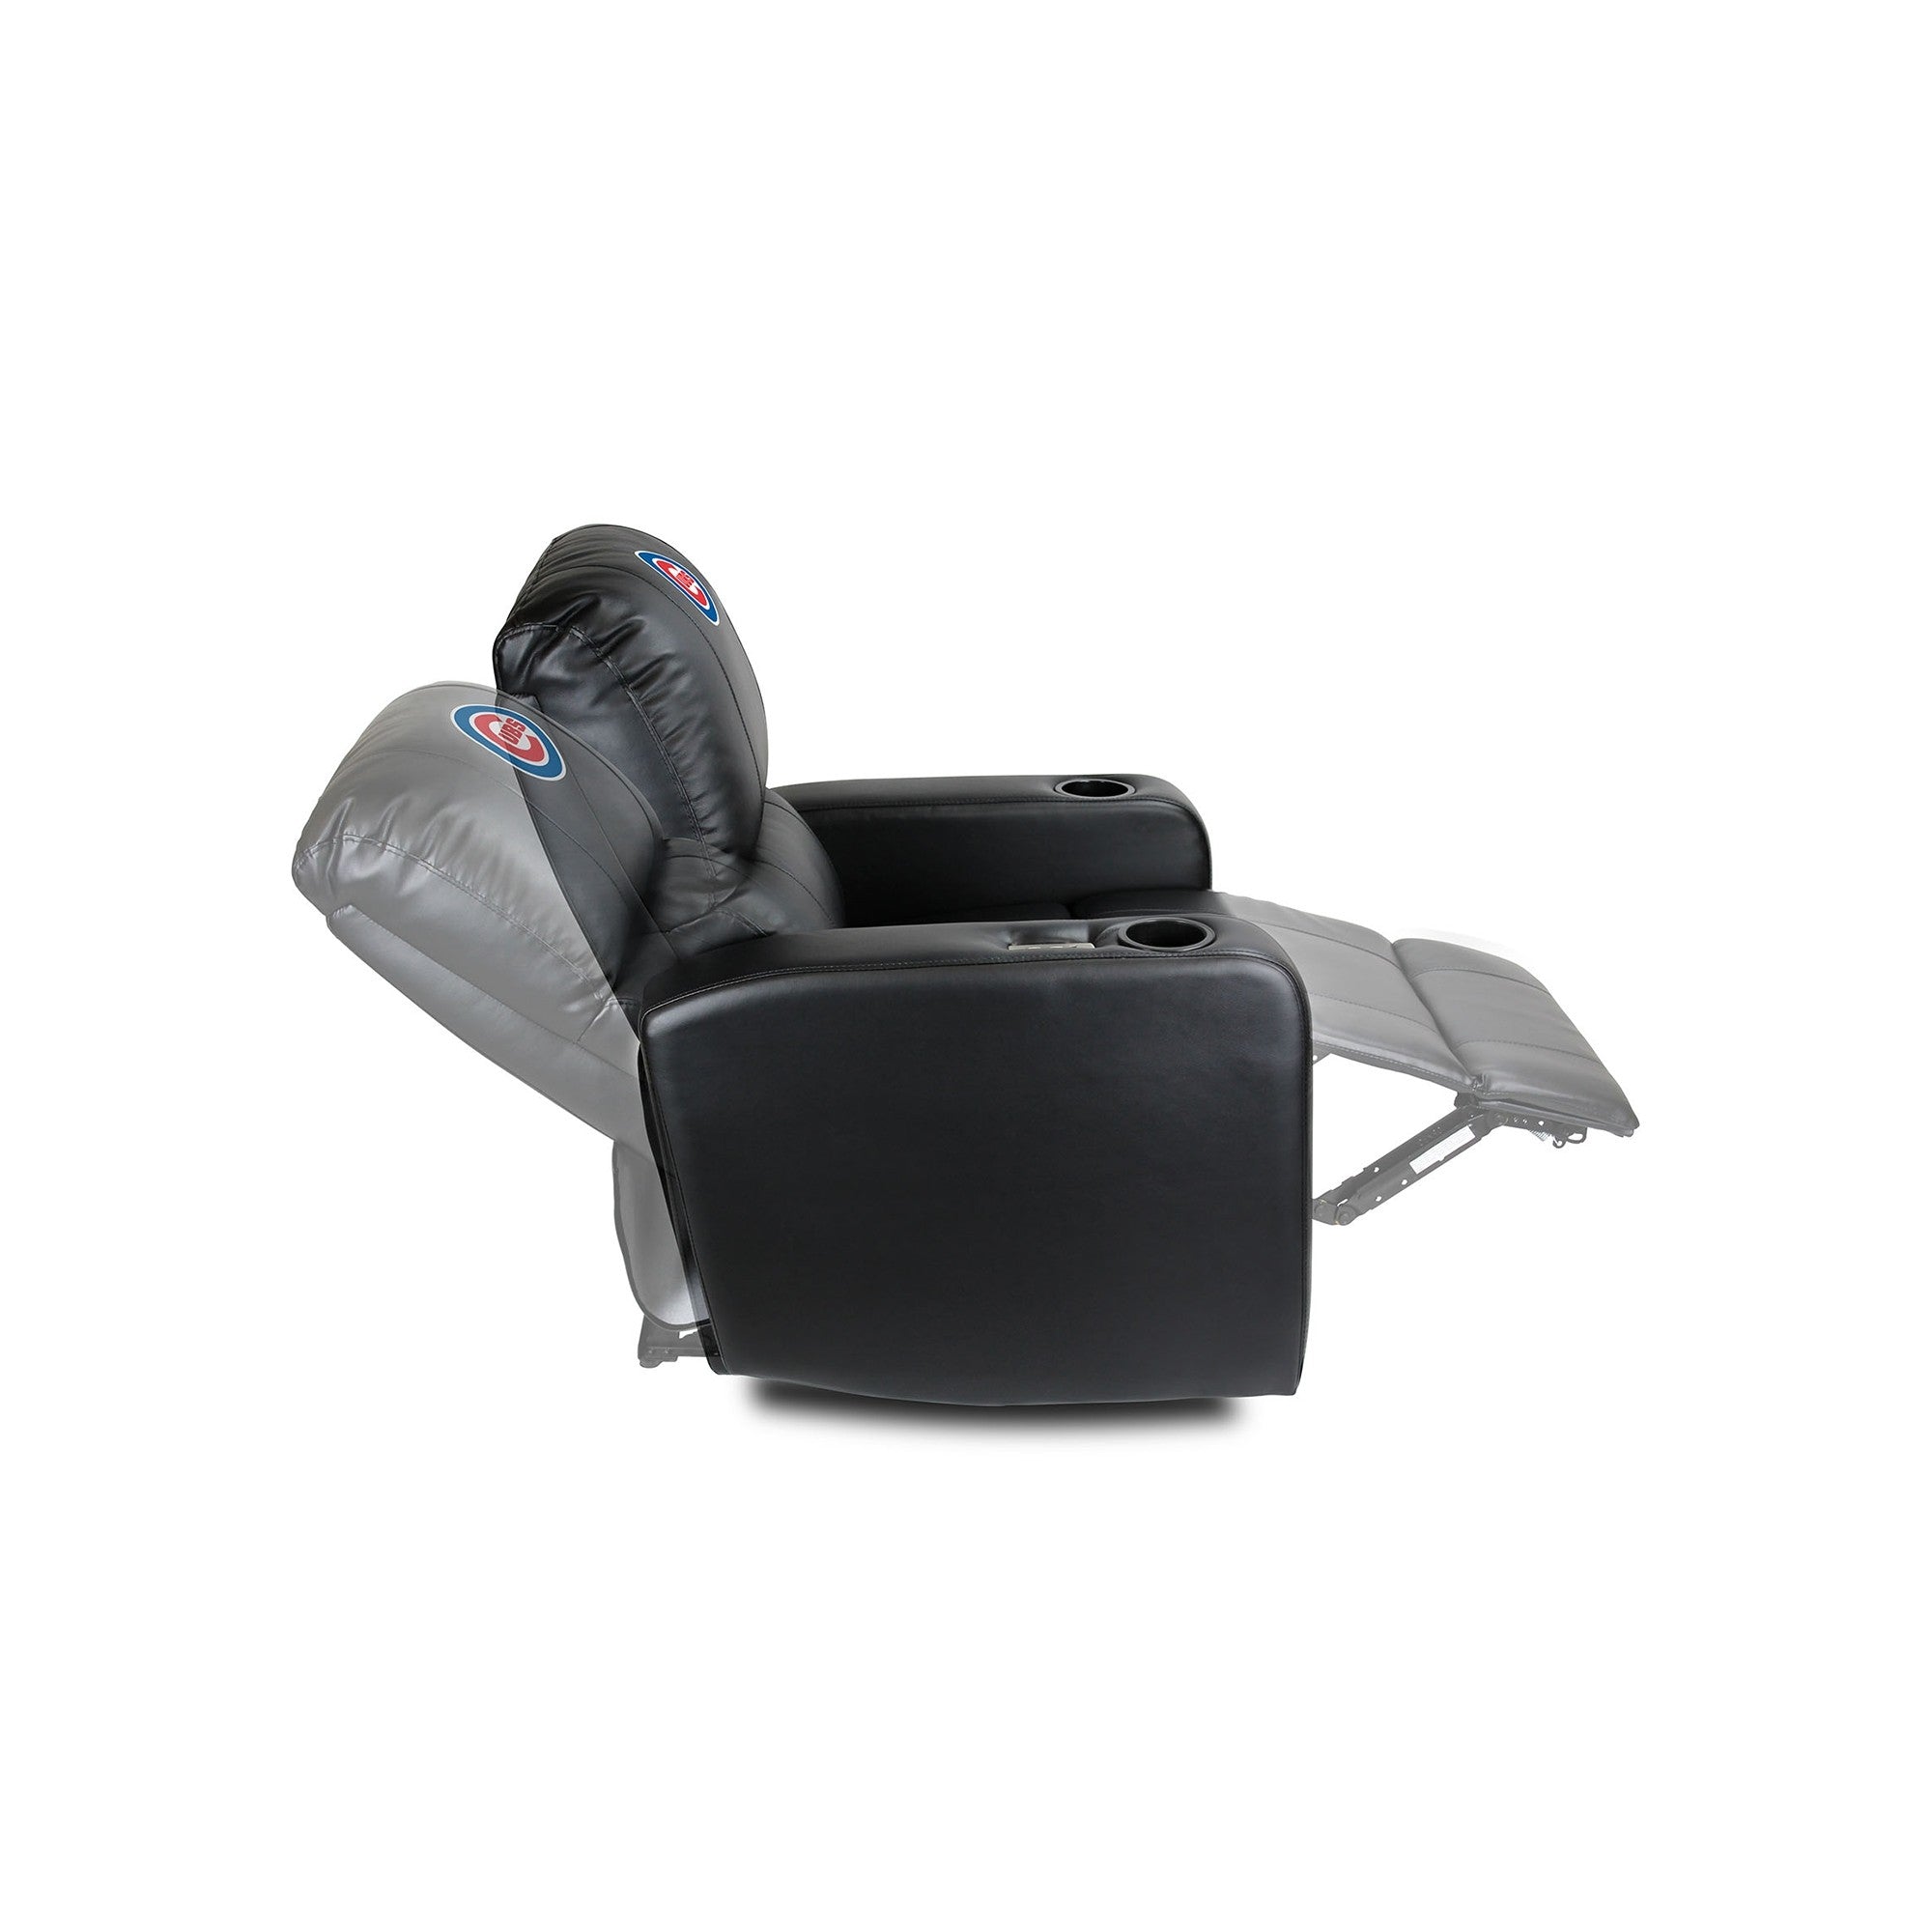 Imperial Chicago Cubs Power Theater Recliner With USB Port